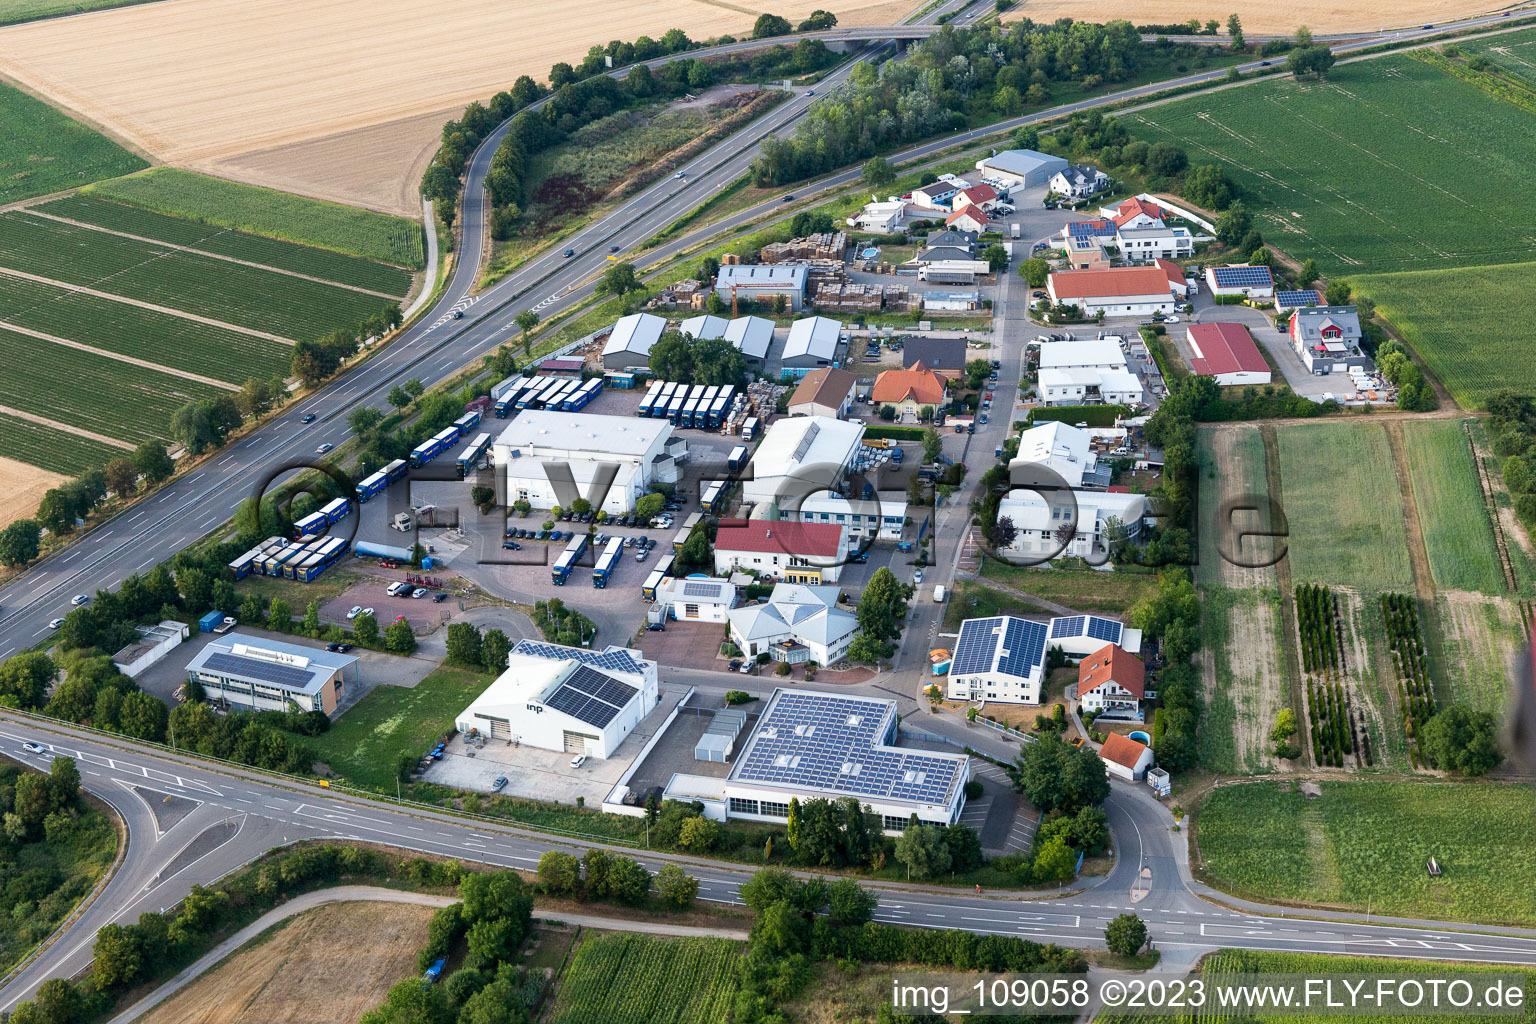 Aerial photograpy of Werkstrasse industrial area in the district Berghausen in Römerberg in the state Rhineland-Palatinate, Germany